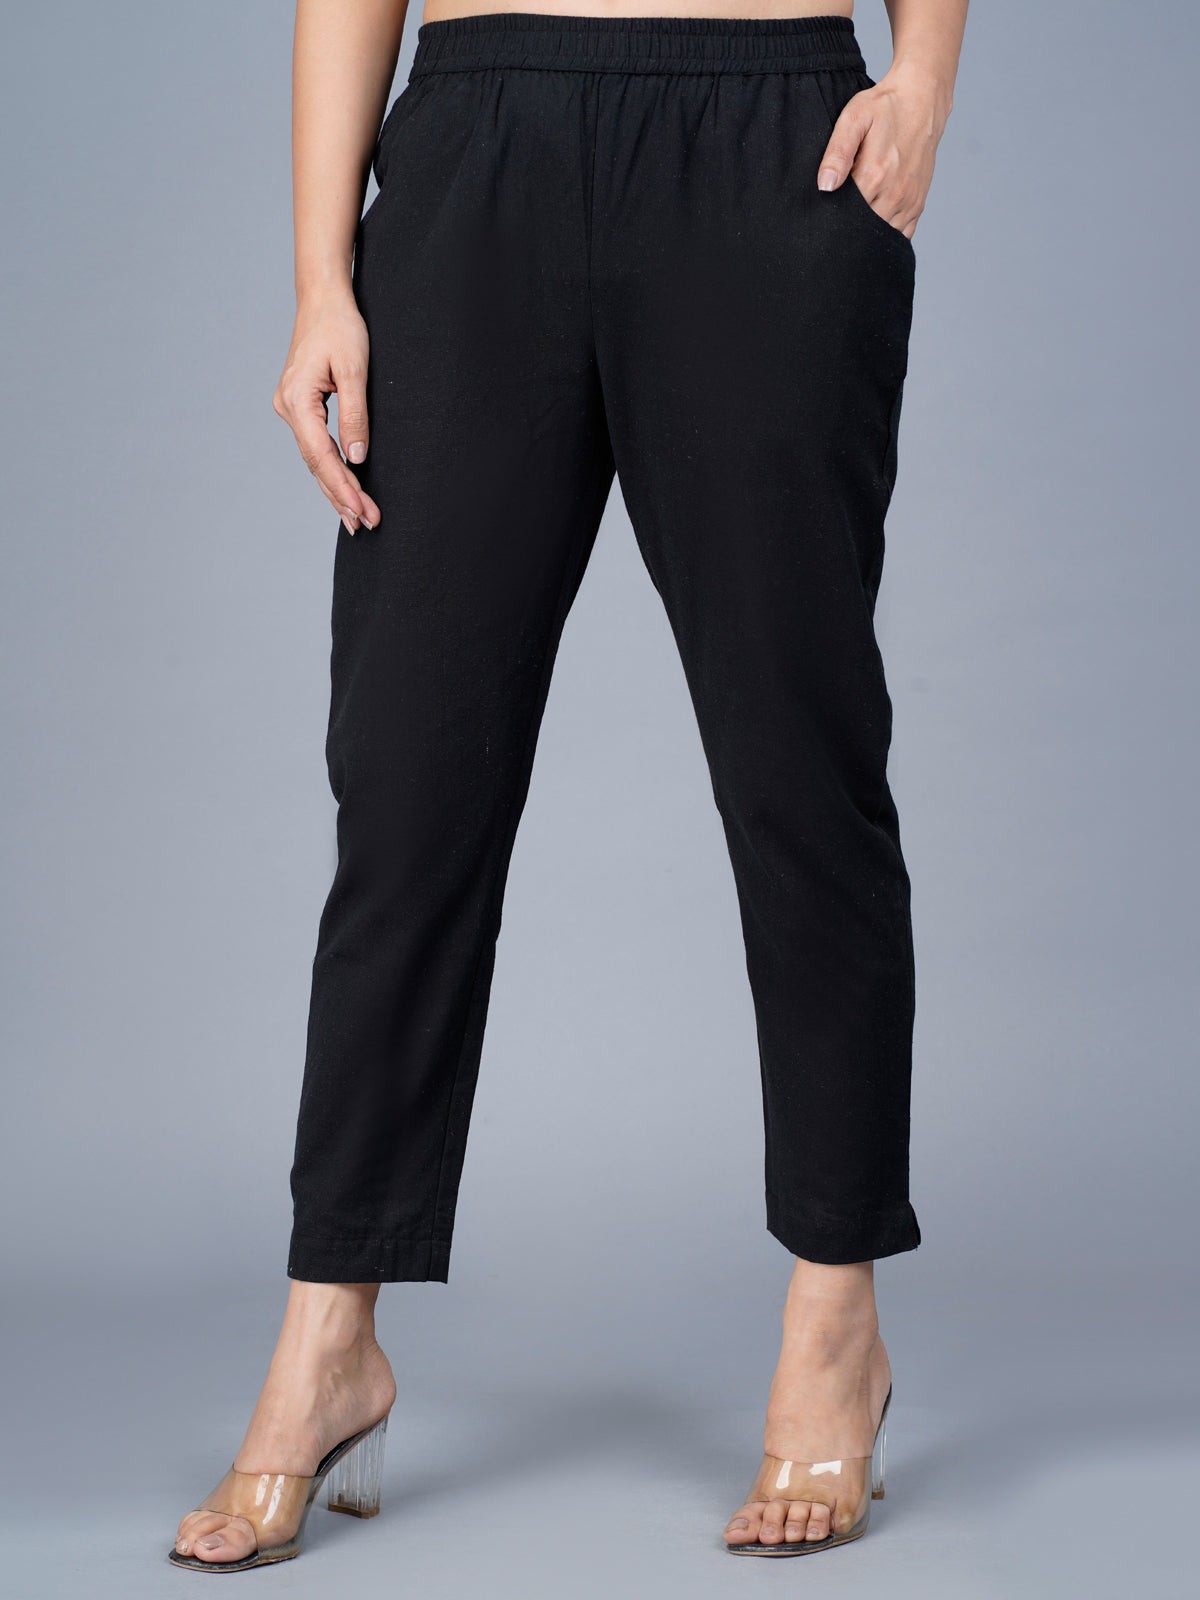 Pack Of 2 Womens Regular Fit Navy Blue And Black Fully Elastic Waistband Cotton Trouser